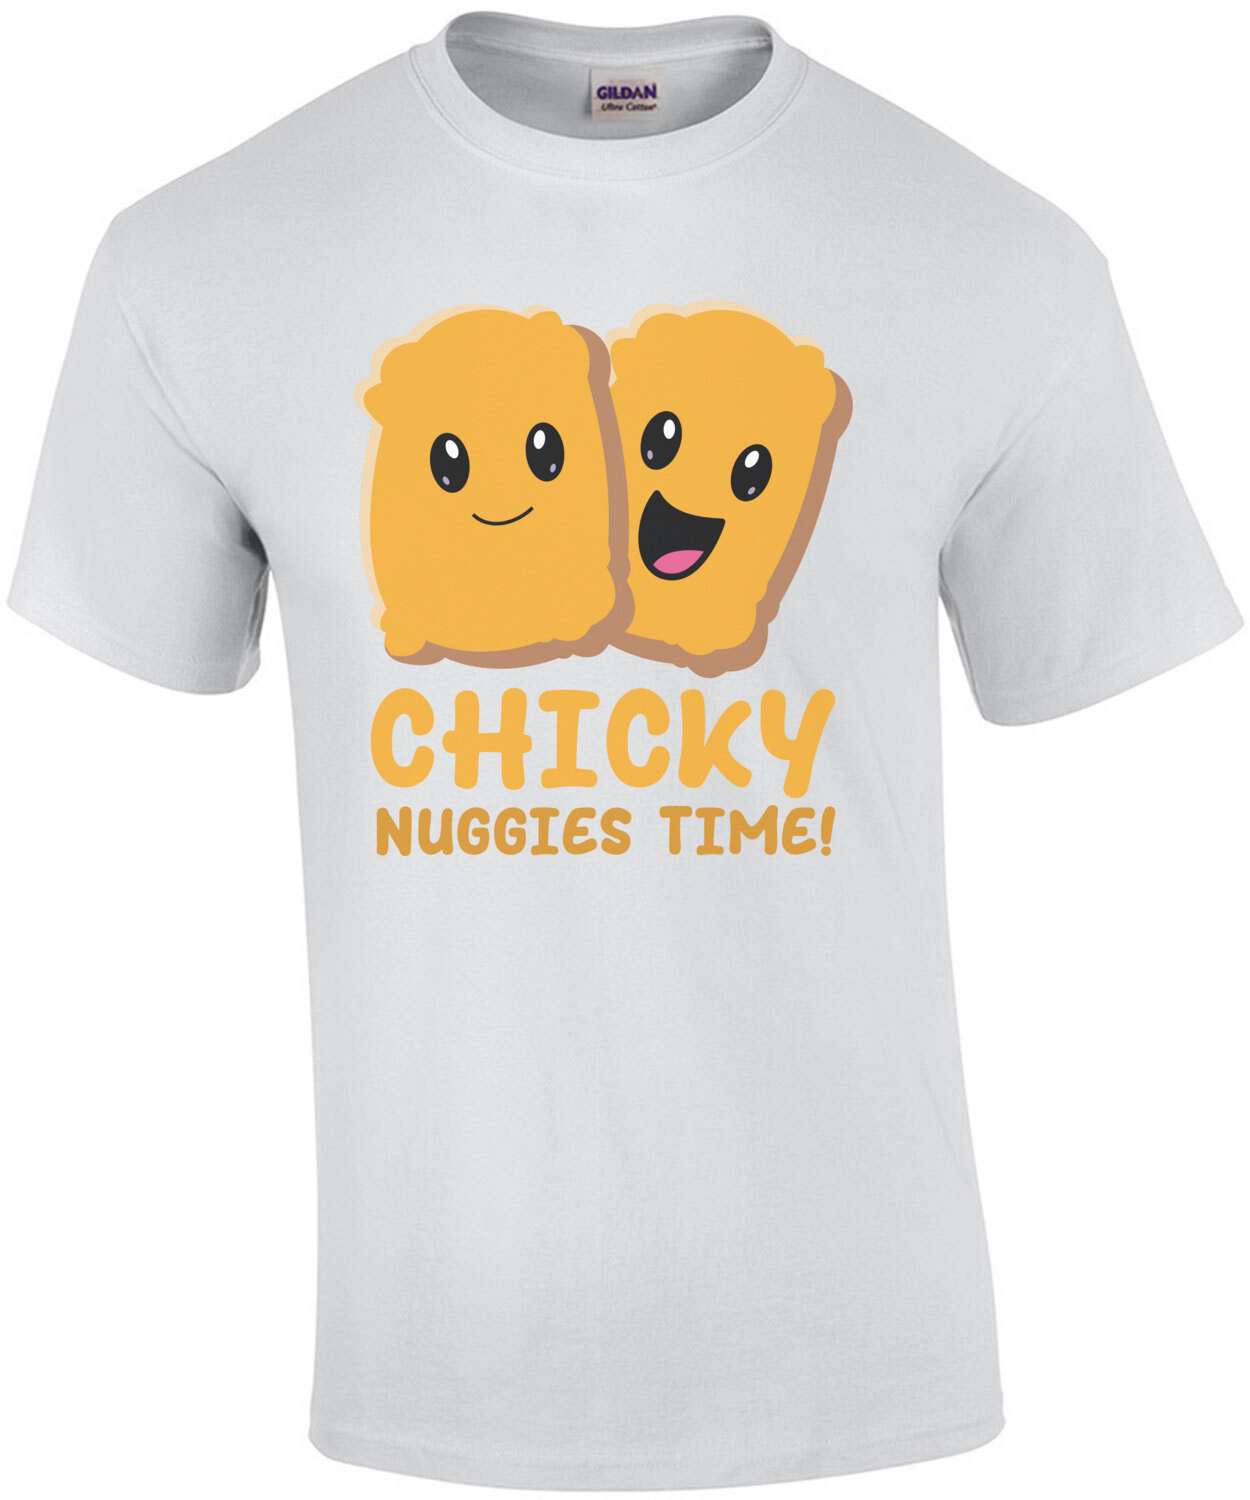 Chicky Nuggies Time! Funny Viral Meme T-Shirt